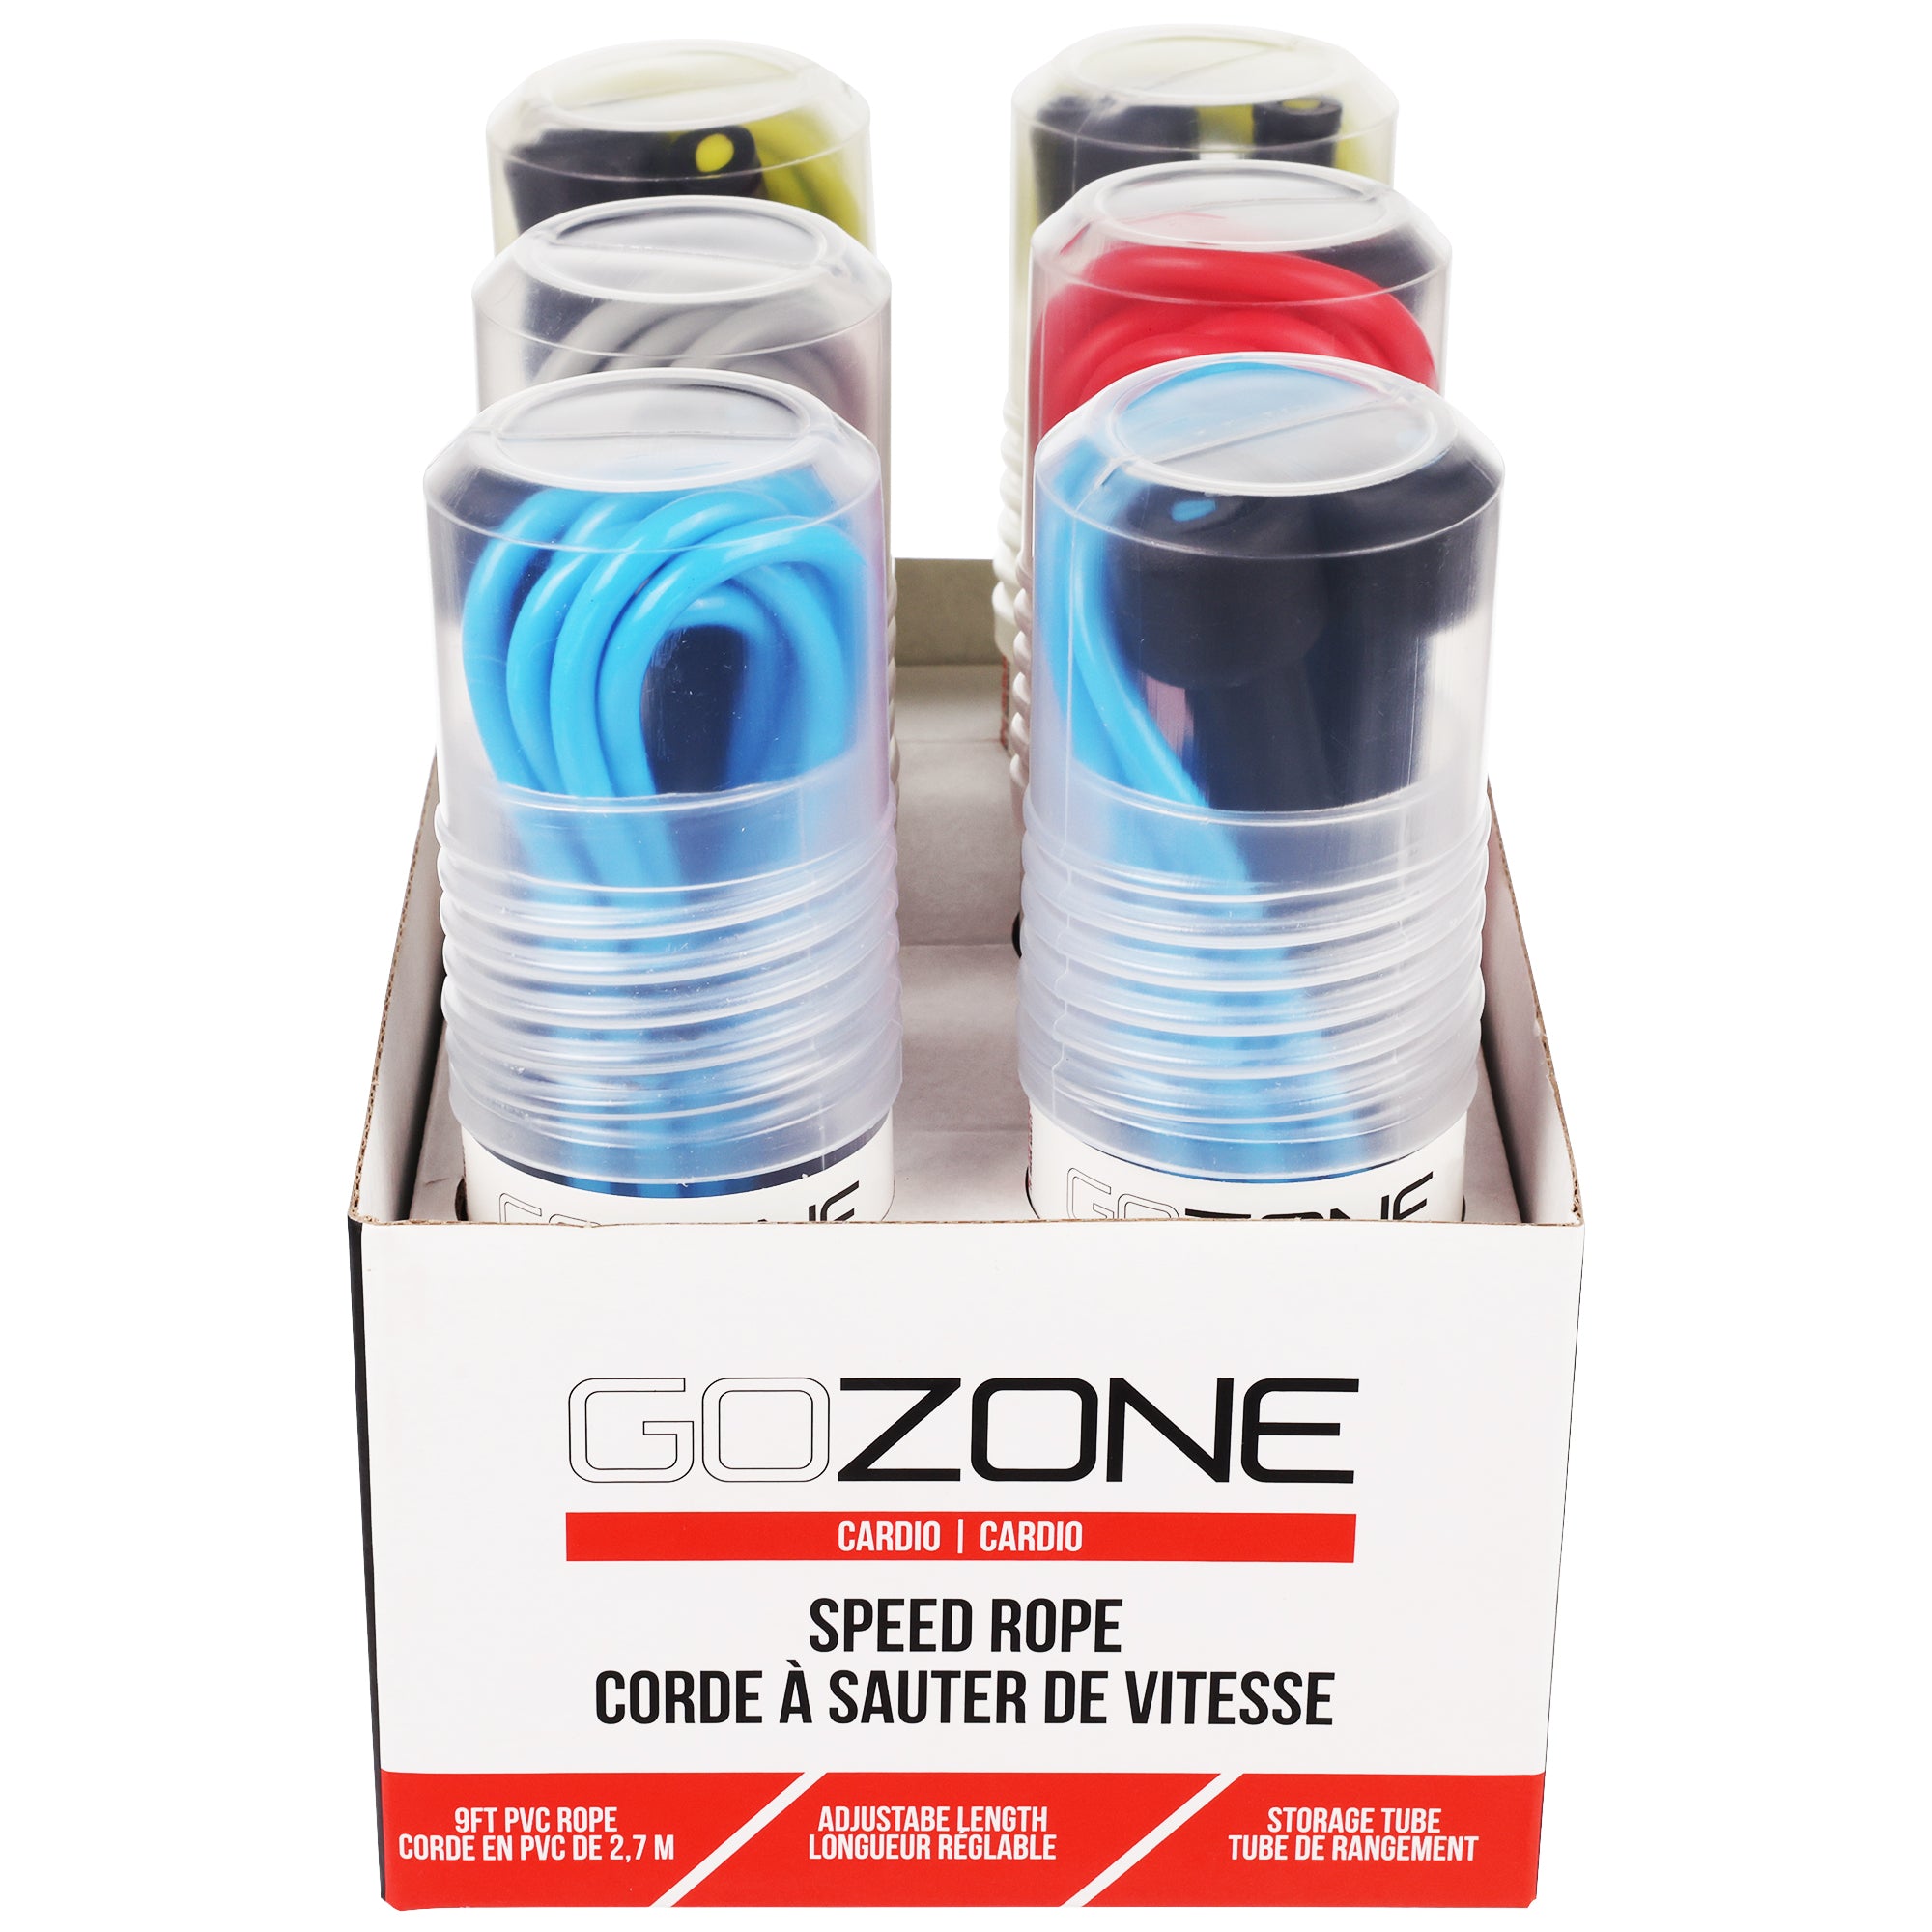 1lb Weighted Jump Rope – Red/Black – GoZone – GoZone Canada